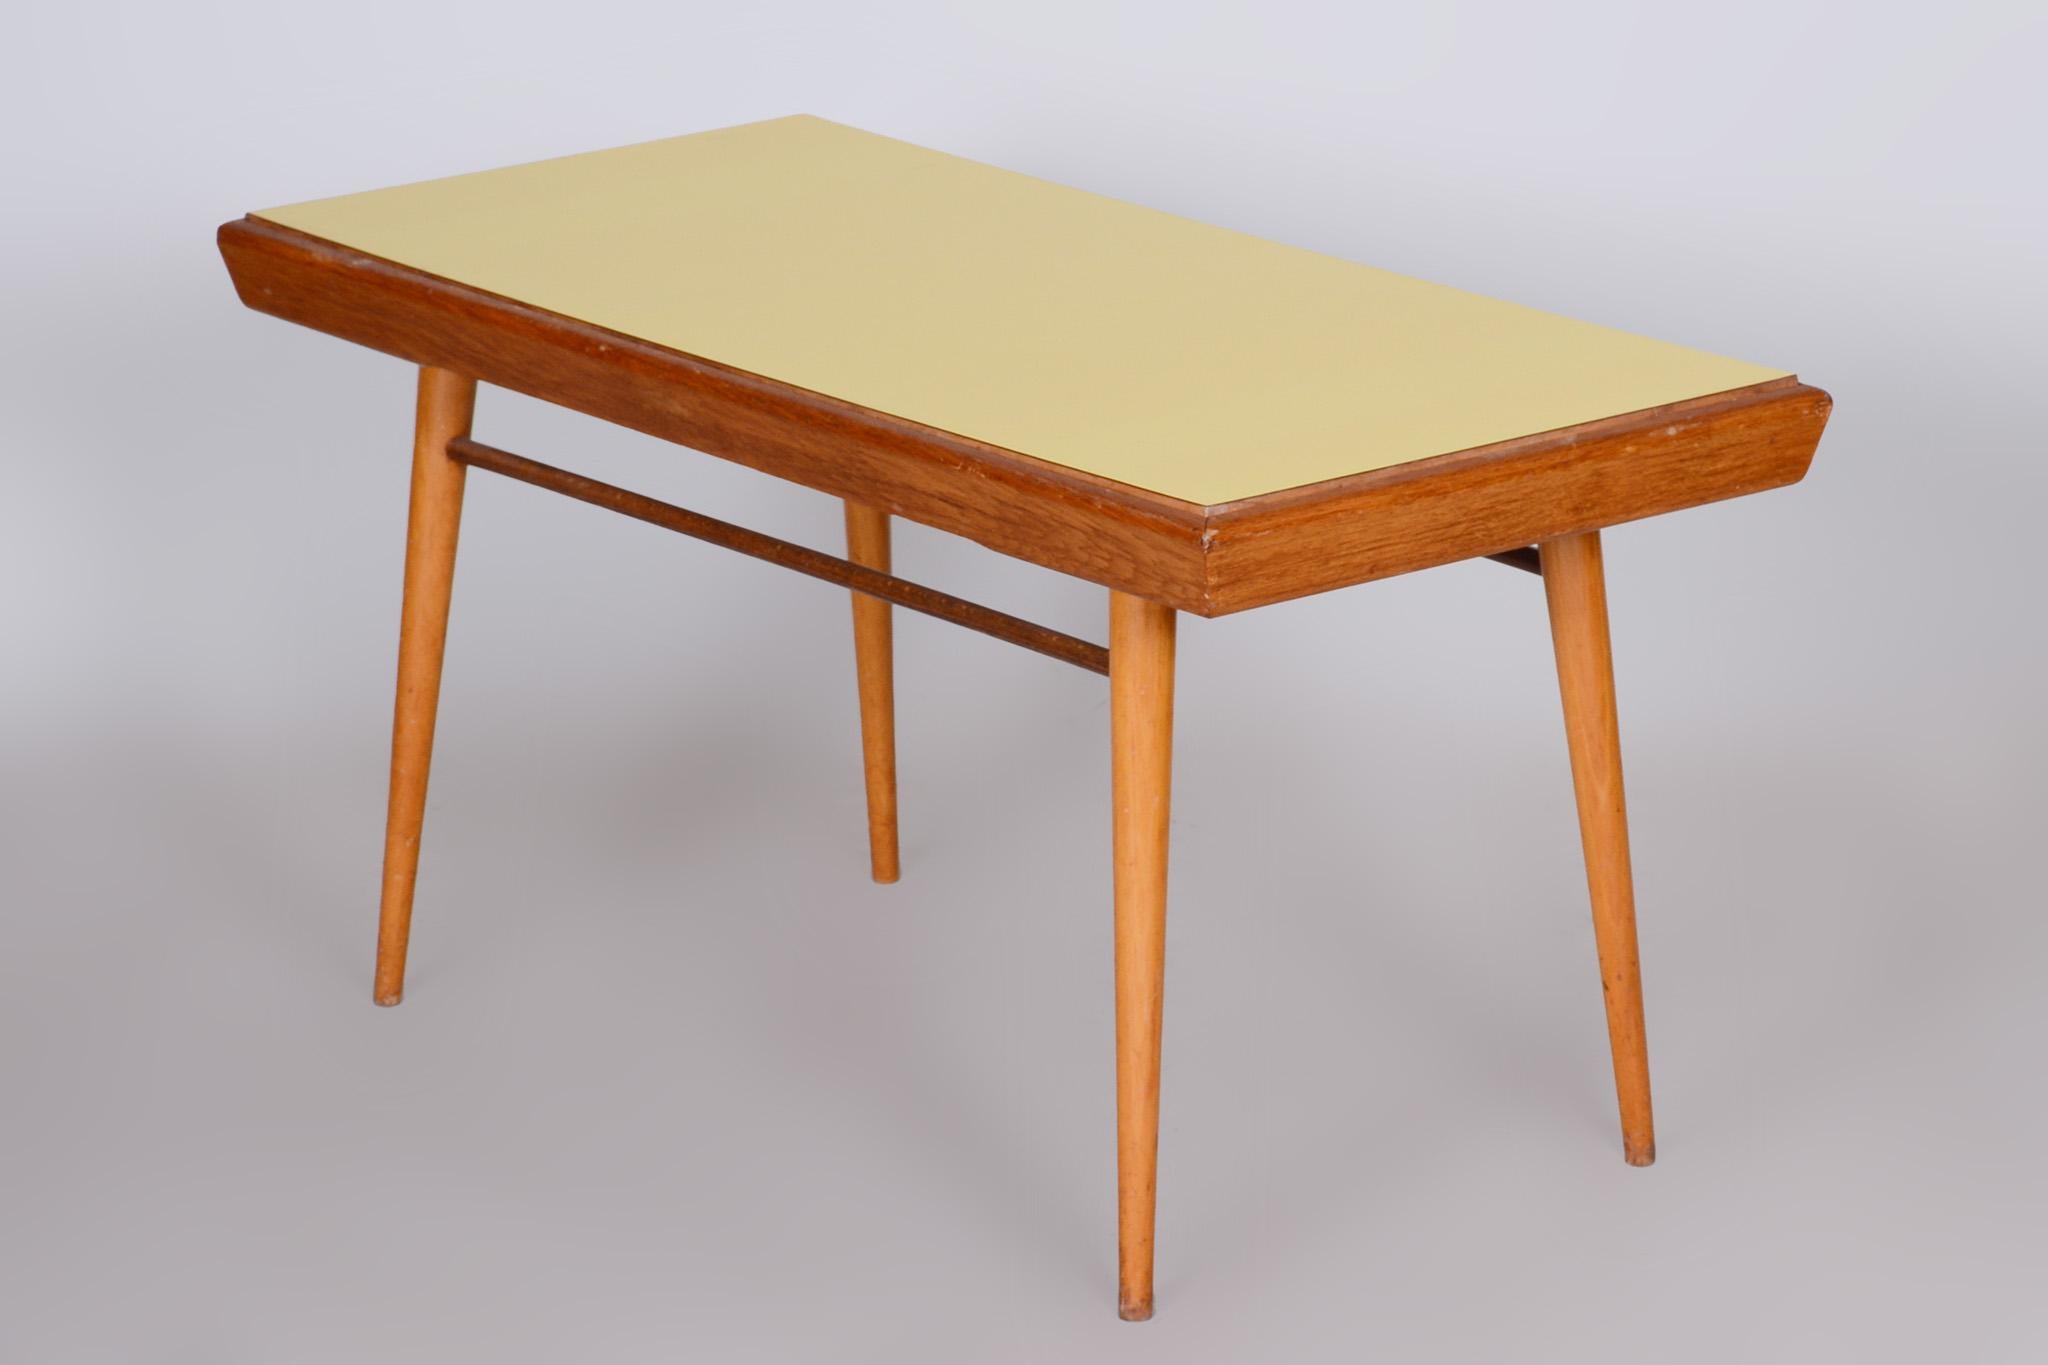 Oak Midcentury Coffee Table, Well-Preserved Condition, Czechia, 1950s For Sale 3